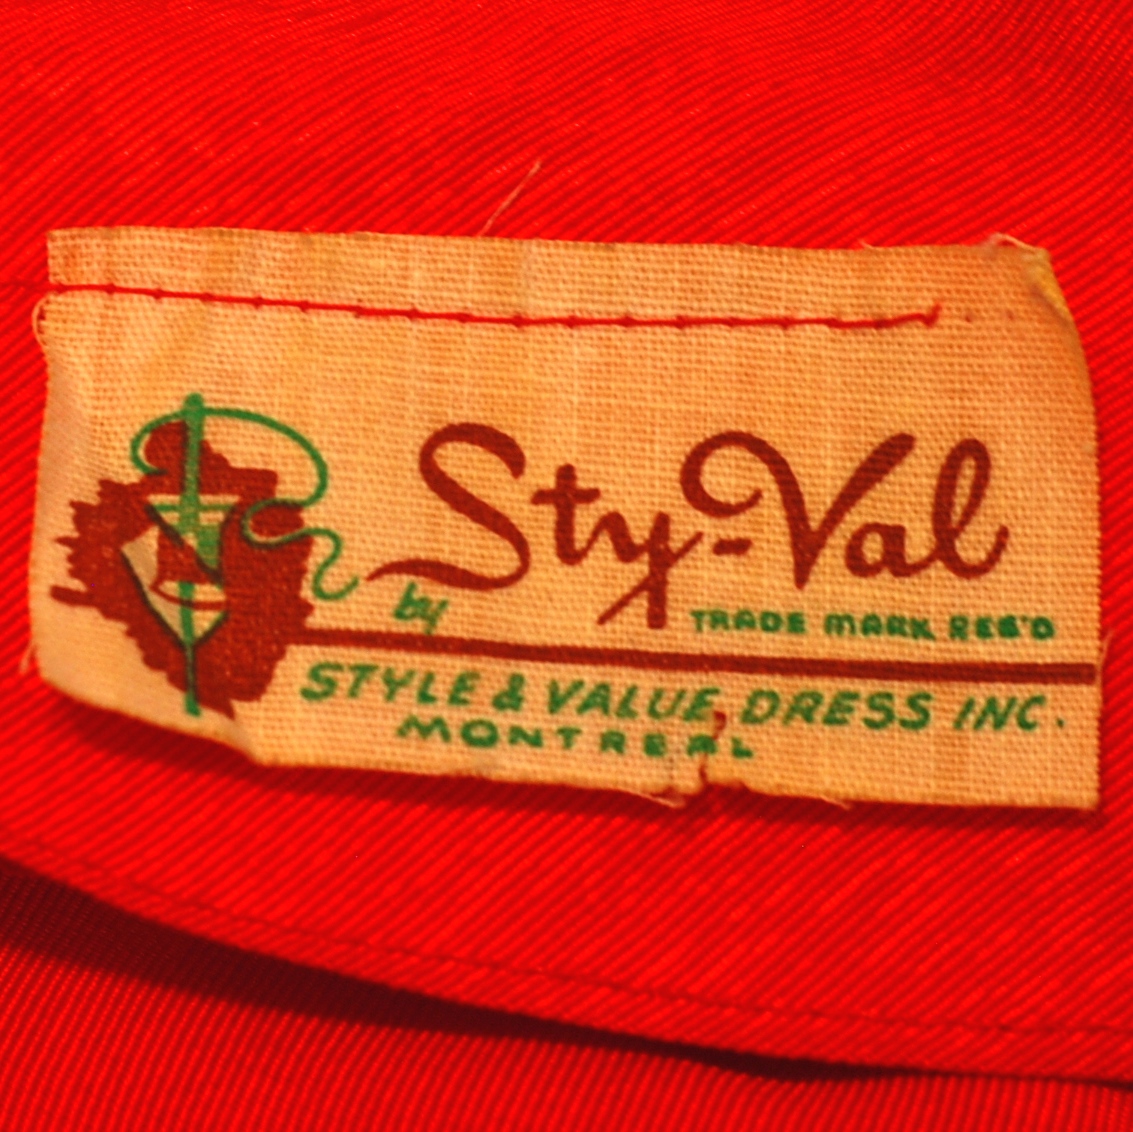 Sty-Val Montreal 1940’s Red Dress Of Leaf Patterned Gabardine | QUIET WEST